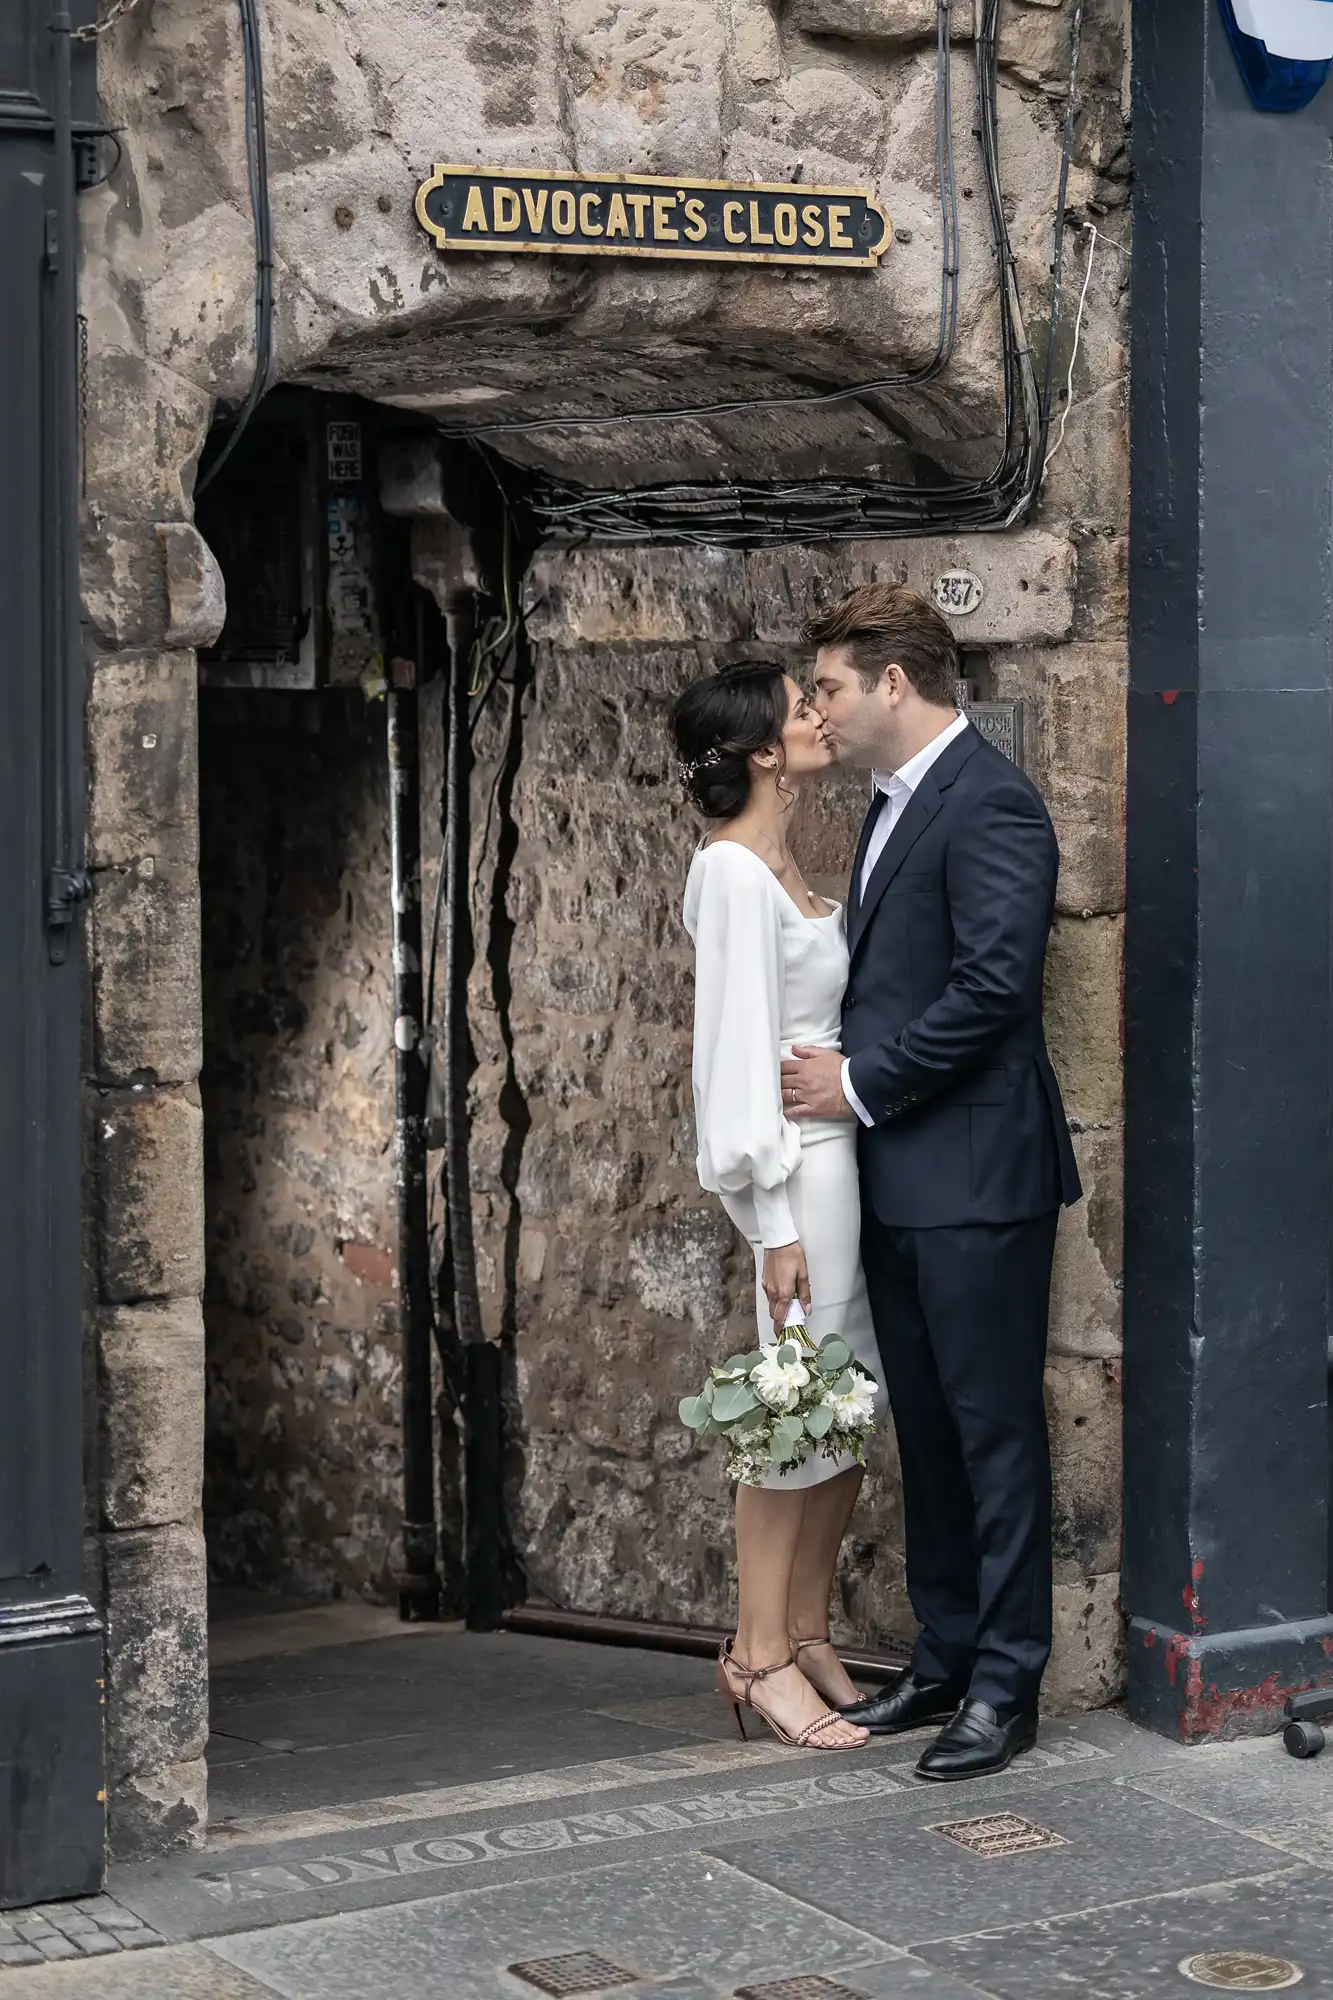 A couple kissing at the entrance of advocate's close, edinburgh, with the woman holding a bouquet and the man in a suit.